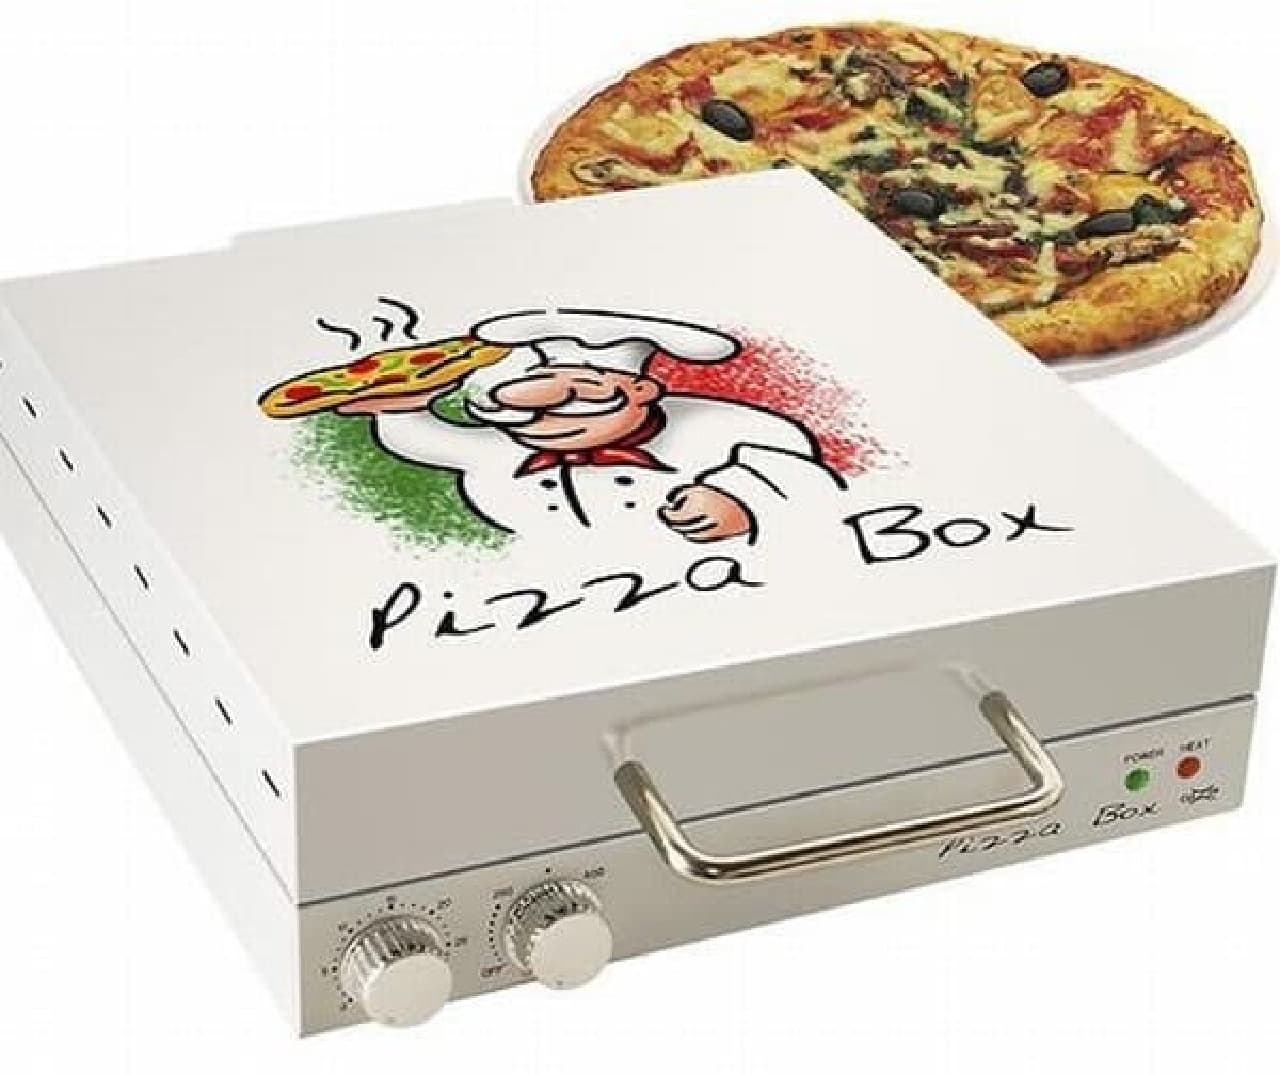 Electric oven for pizza "Pizza Box Oven"